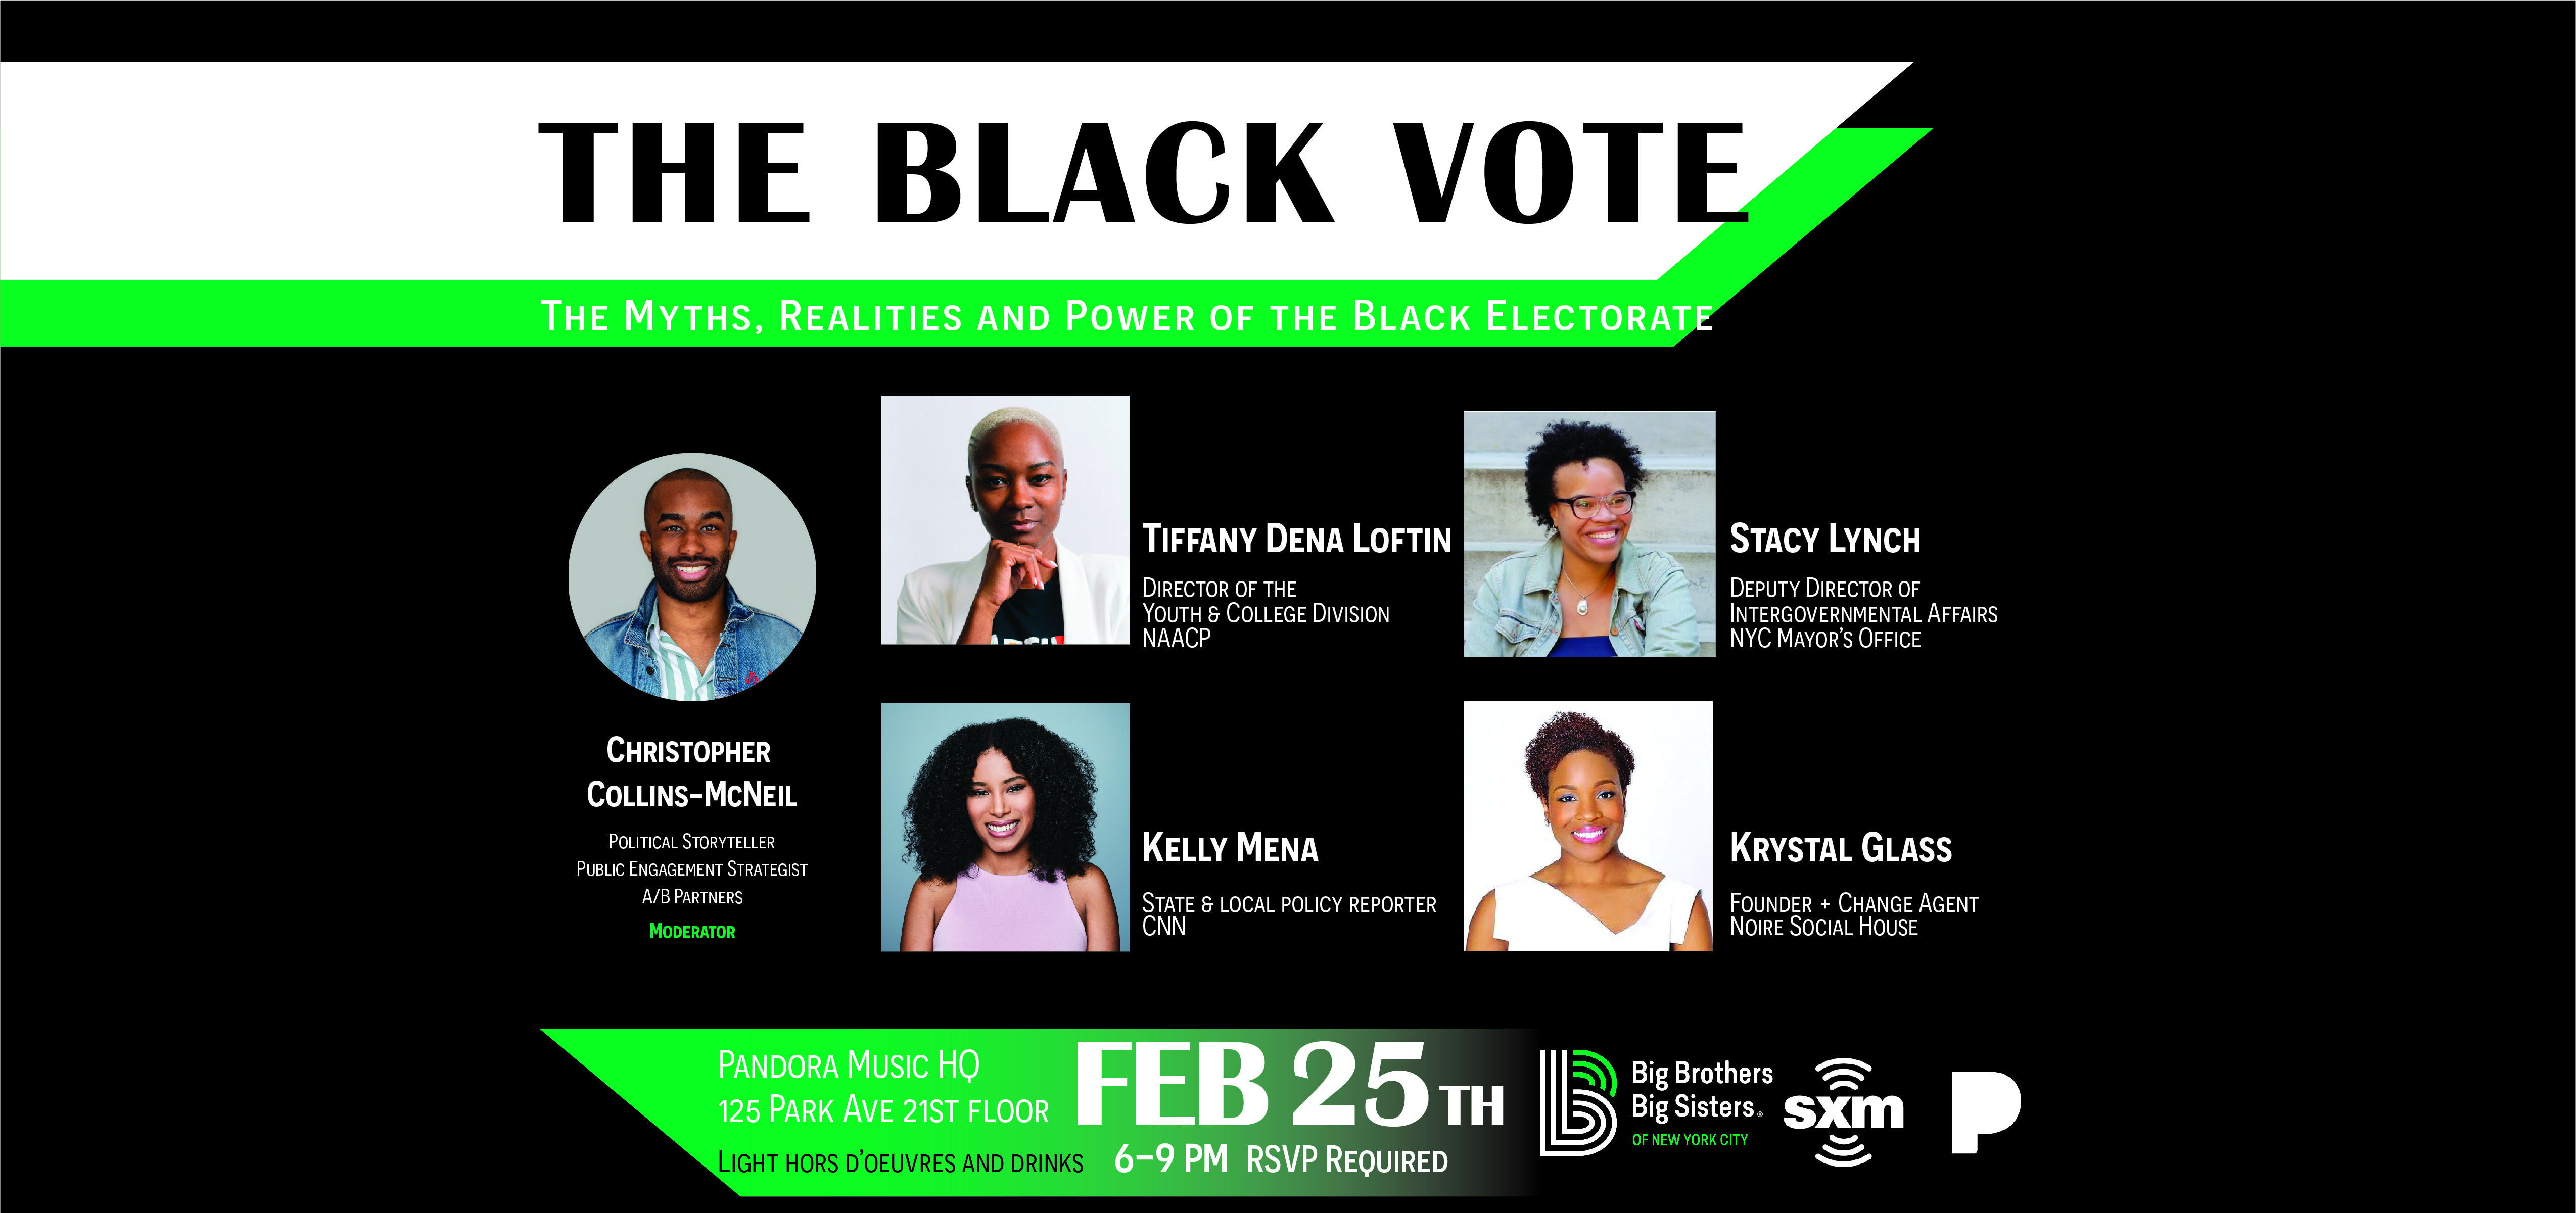 The Black Vote: The Myths, Realities & the Power of the Black Electorate